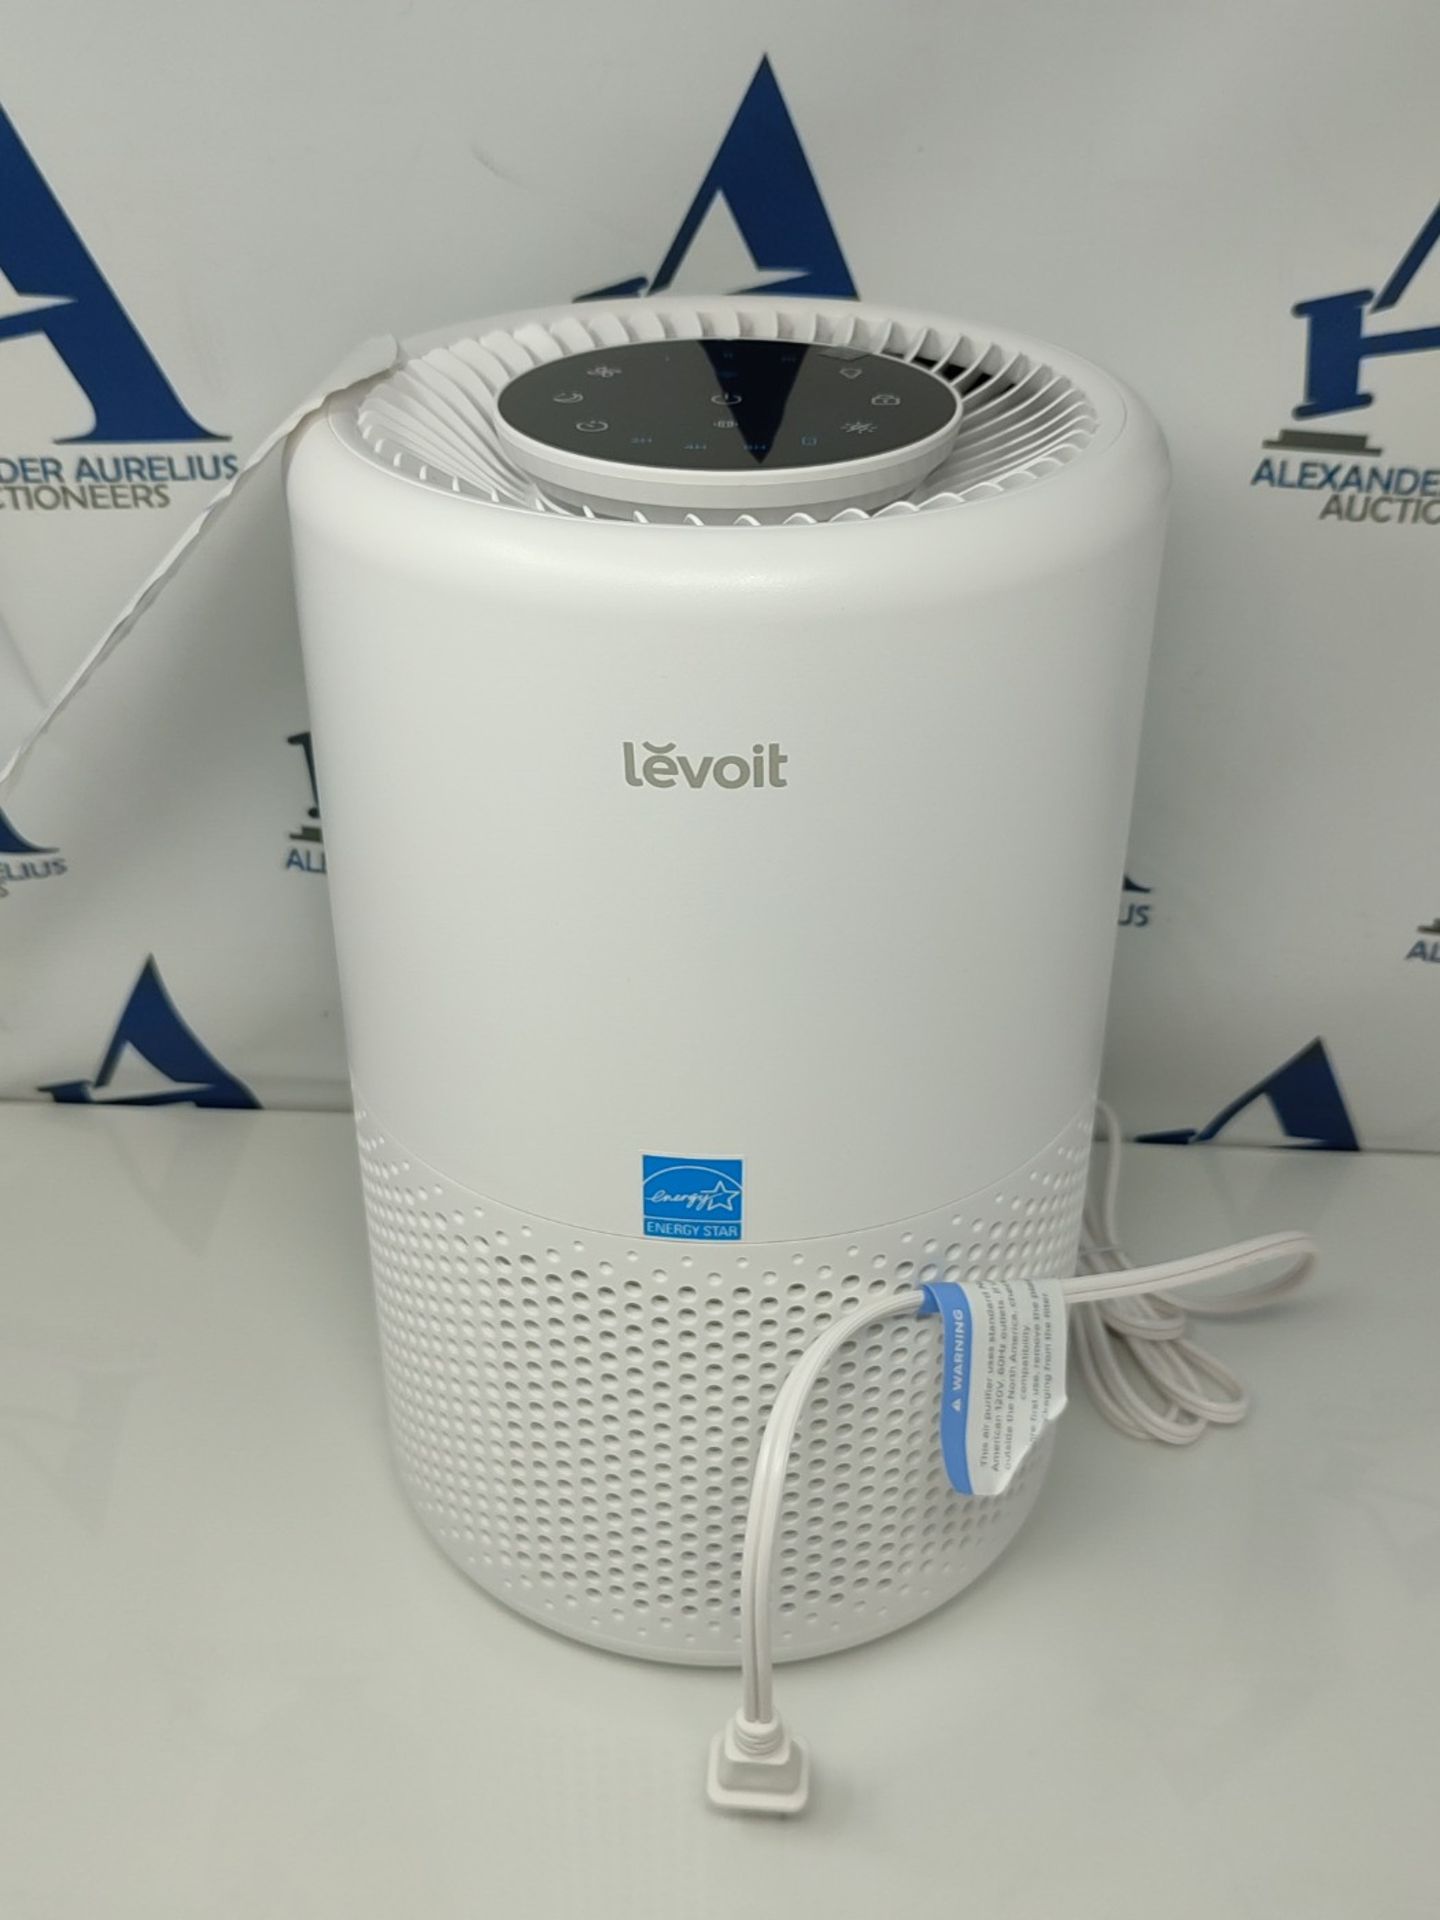 RRP £76.00 LEVOIT Smart WiFi Air Purifier for Home, Alexa Enabled H13 HEPA Filter, CADR 170m³/h, - Image 6 of 6